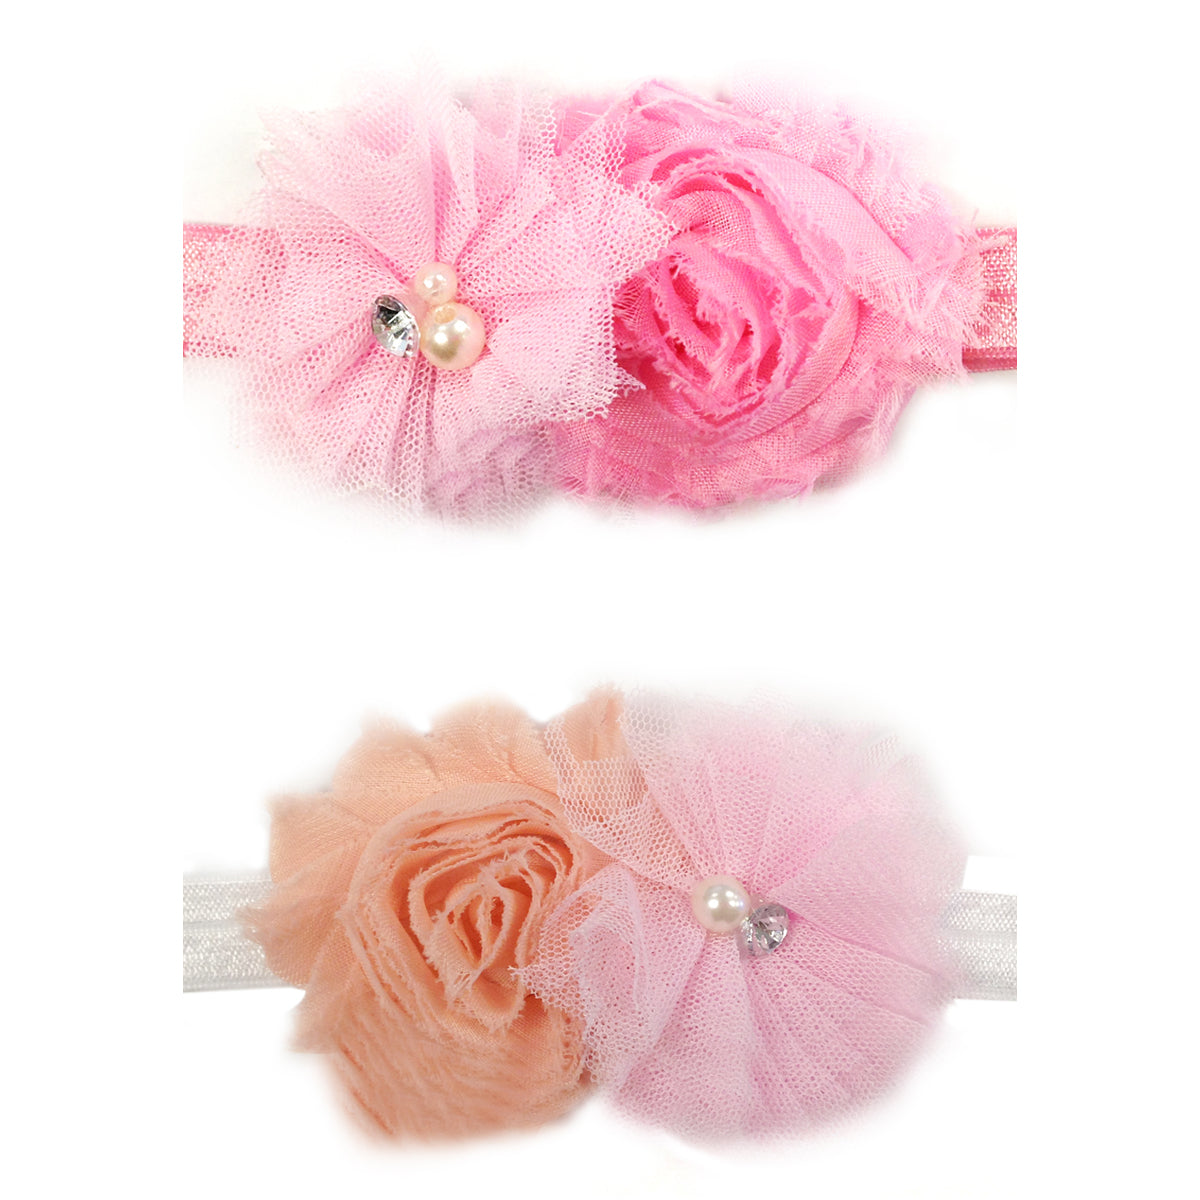 Kella Milla Frayed Shabby Chic Floral Headbands for Baby & Toddler Girls (Set of 8)